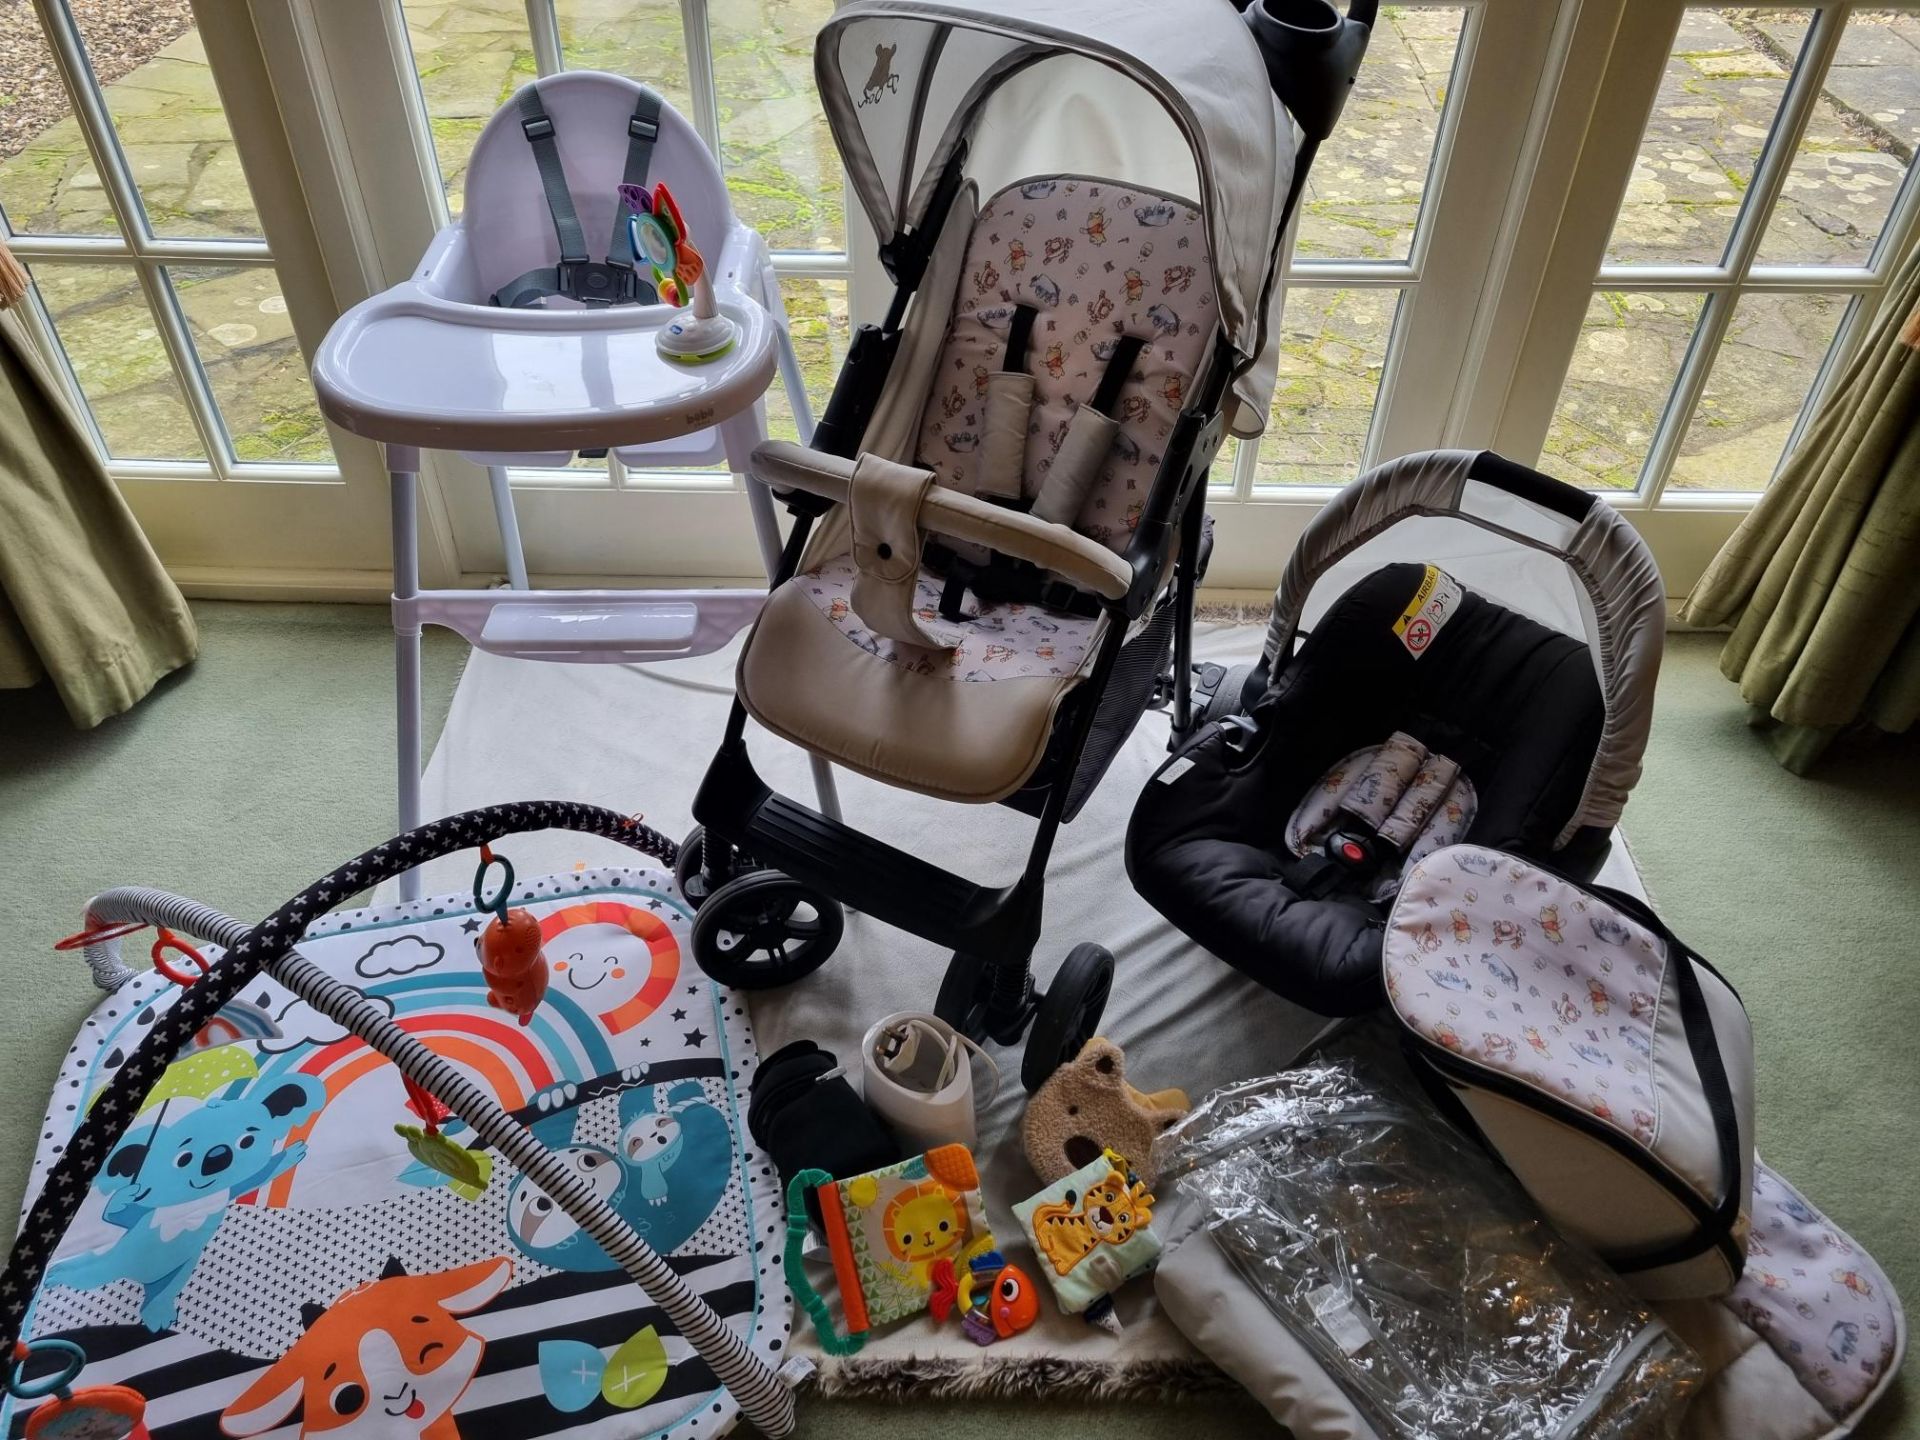 Hauck Disney Pushchair Travel System, Highchair, Tommee Tippee bottle warmer and case, playmat, toys